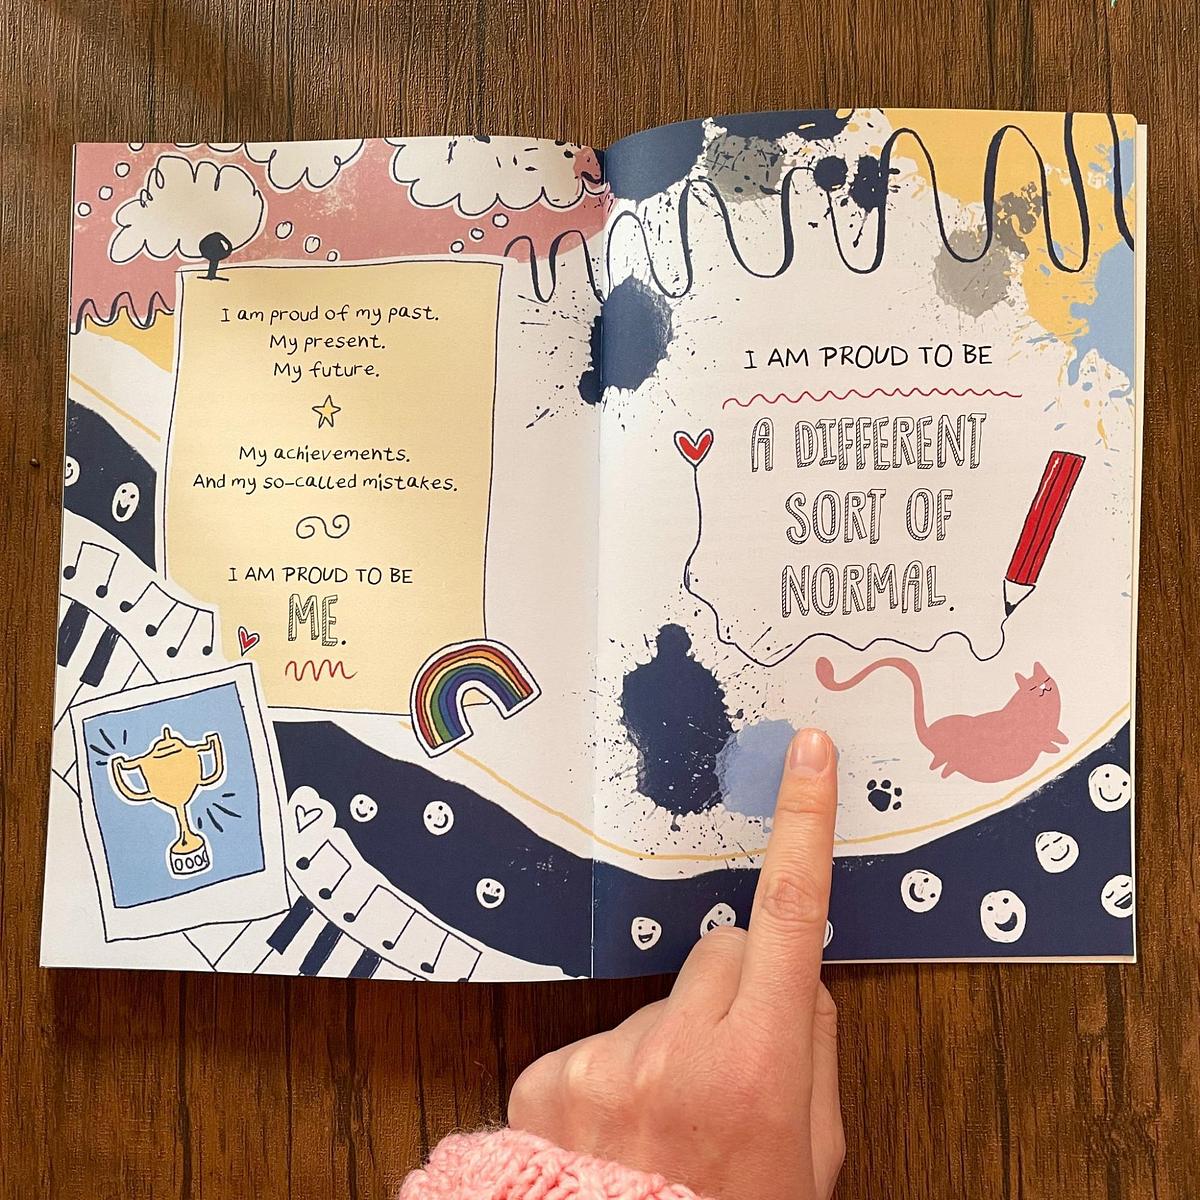 Inside pages of Abigail Balfe's book 'A Different Sort of Normal'